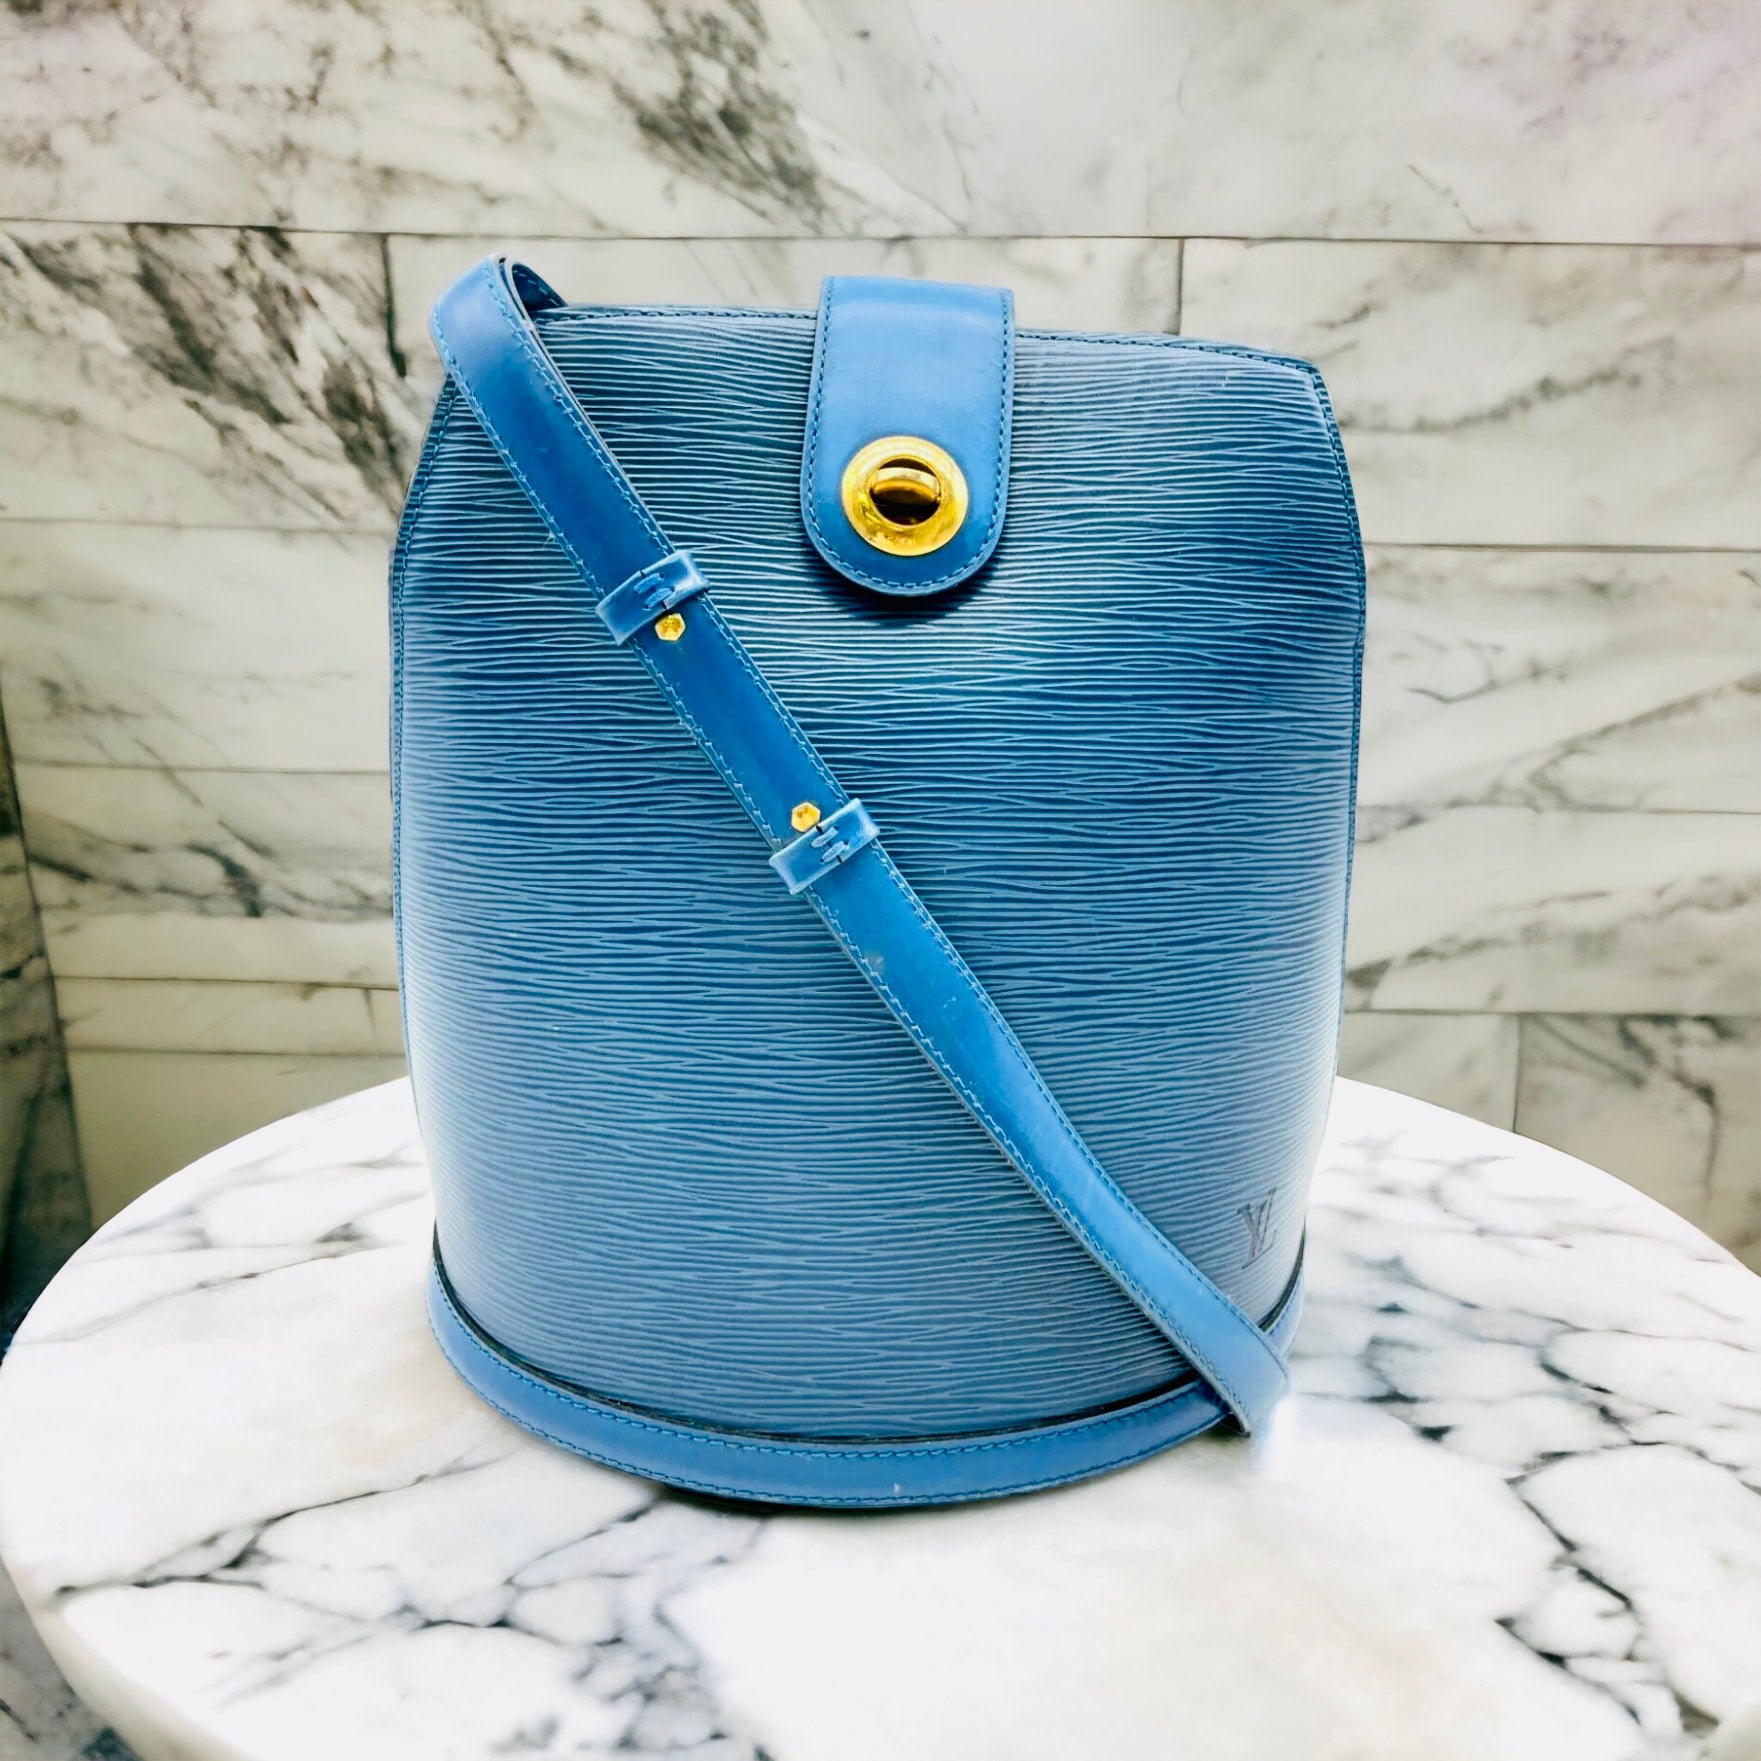 Louis Vuitton Cluny in Blue